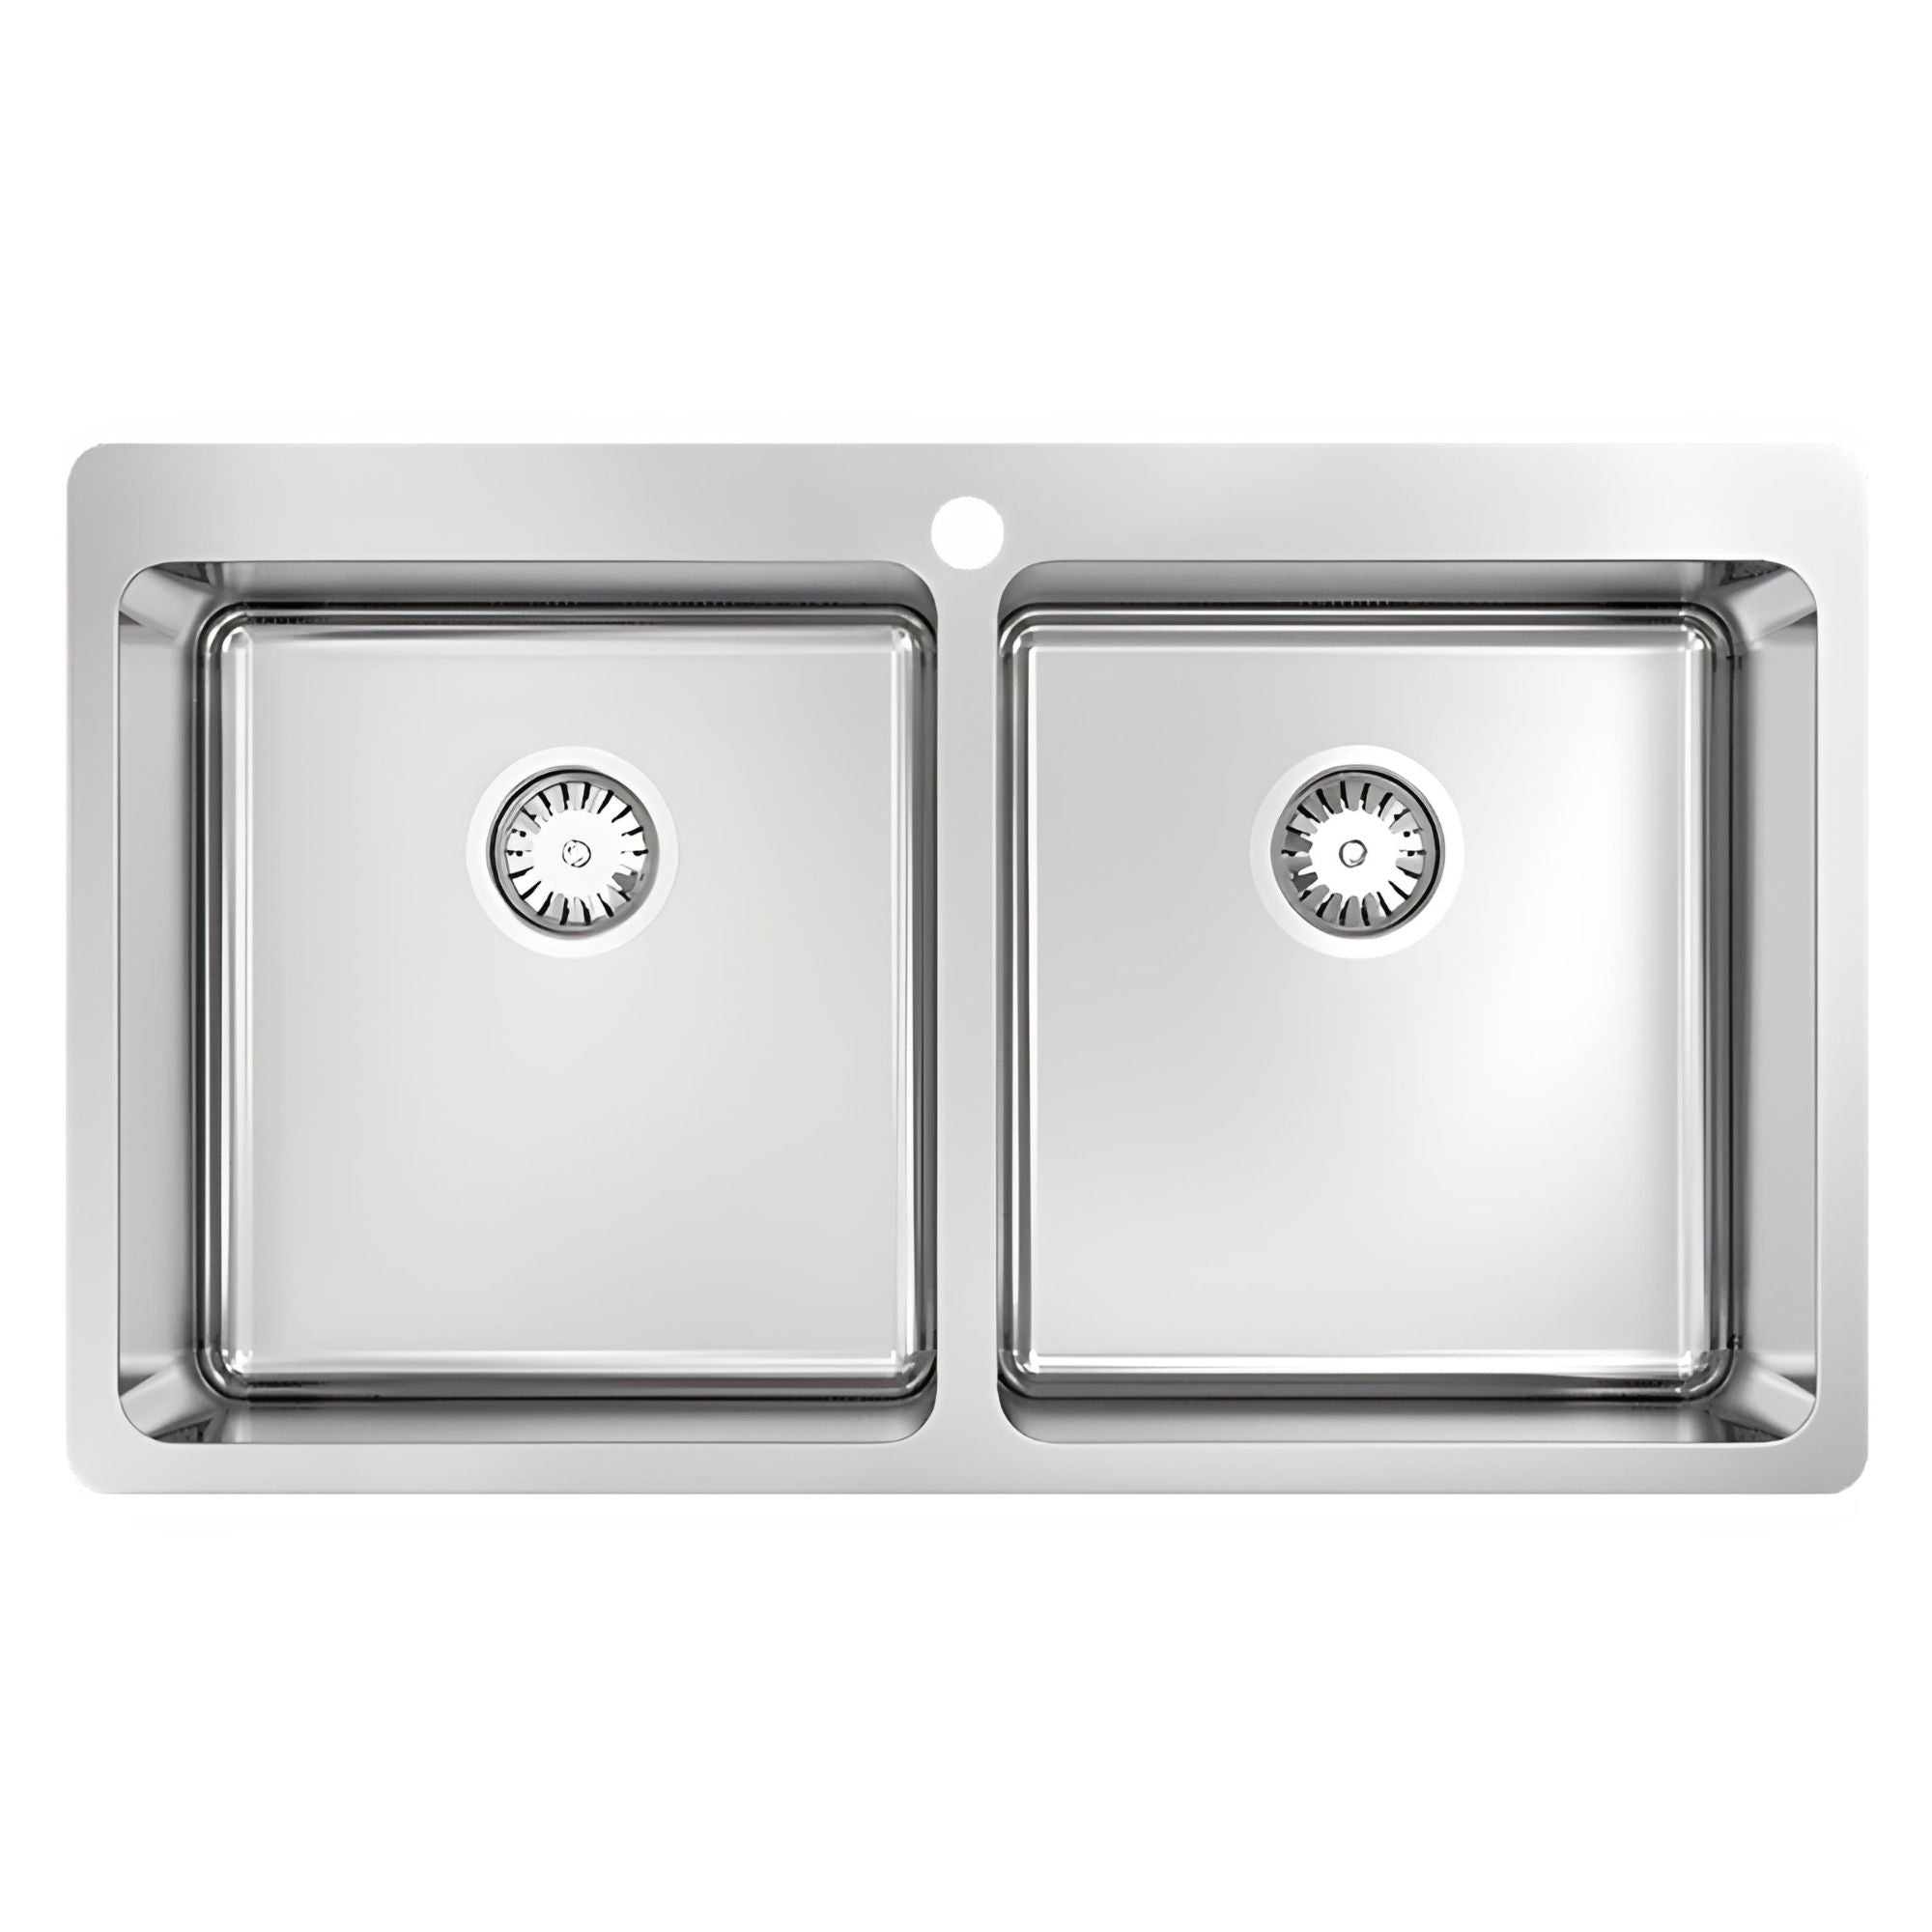 ABEY THE DOUBLE LEICHARDT DOUBLE BOWL LAUNDRY SINK STAINLESS STEEL 860MM